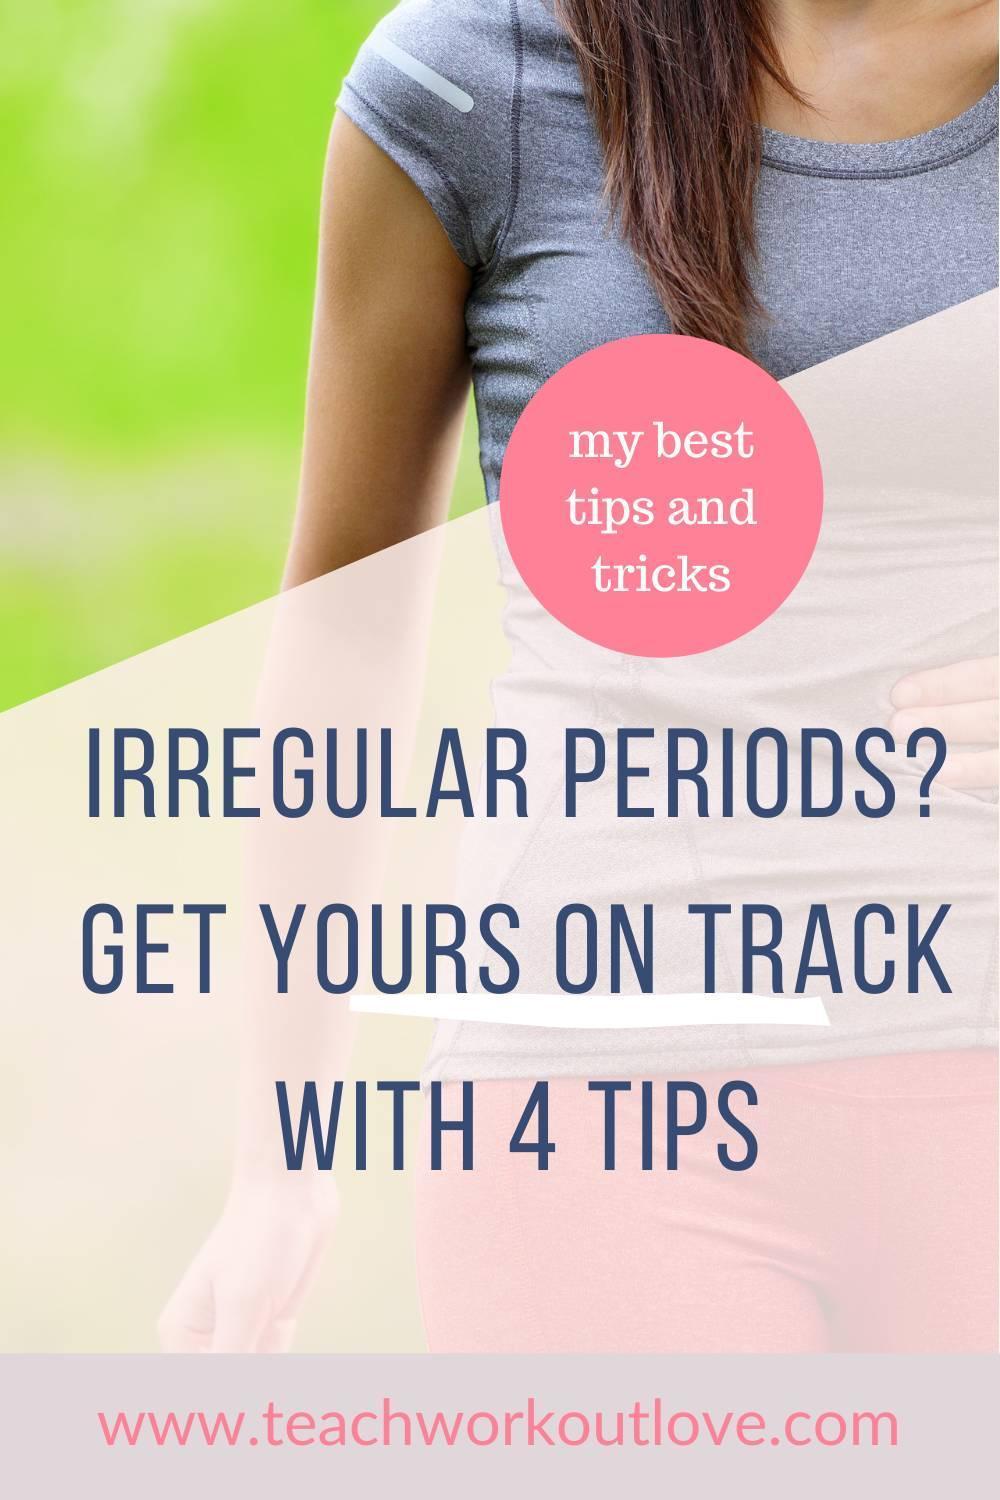 An irregular period means that the time between your monthly periods constantly changes, so your periods come too early or too late. So, what can you do to get your period back on track? Here are a few treatment tips to help you: